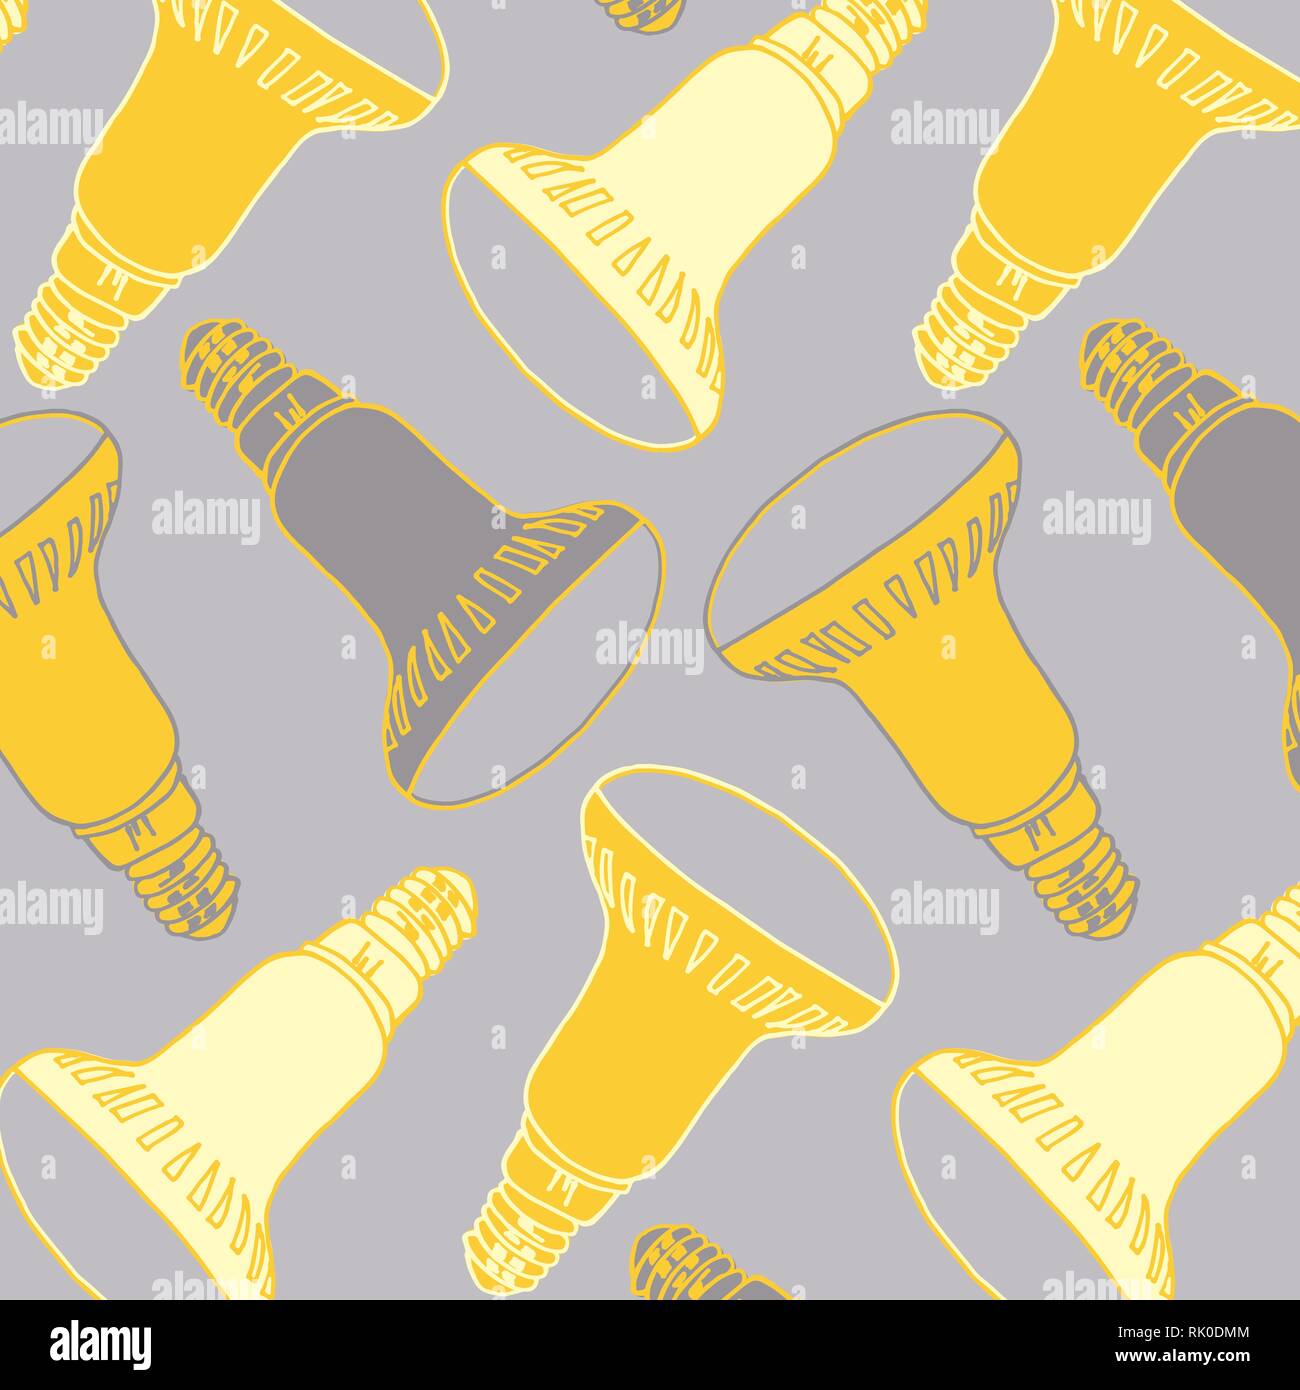 Hand drawn LED light bulbs vector pattern in yellow and gray colors palette Stock Vector